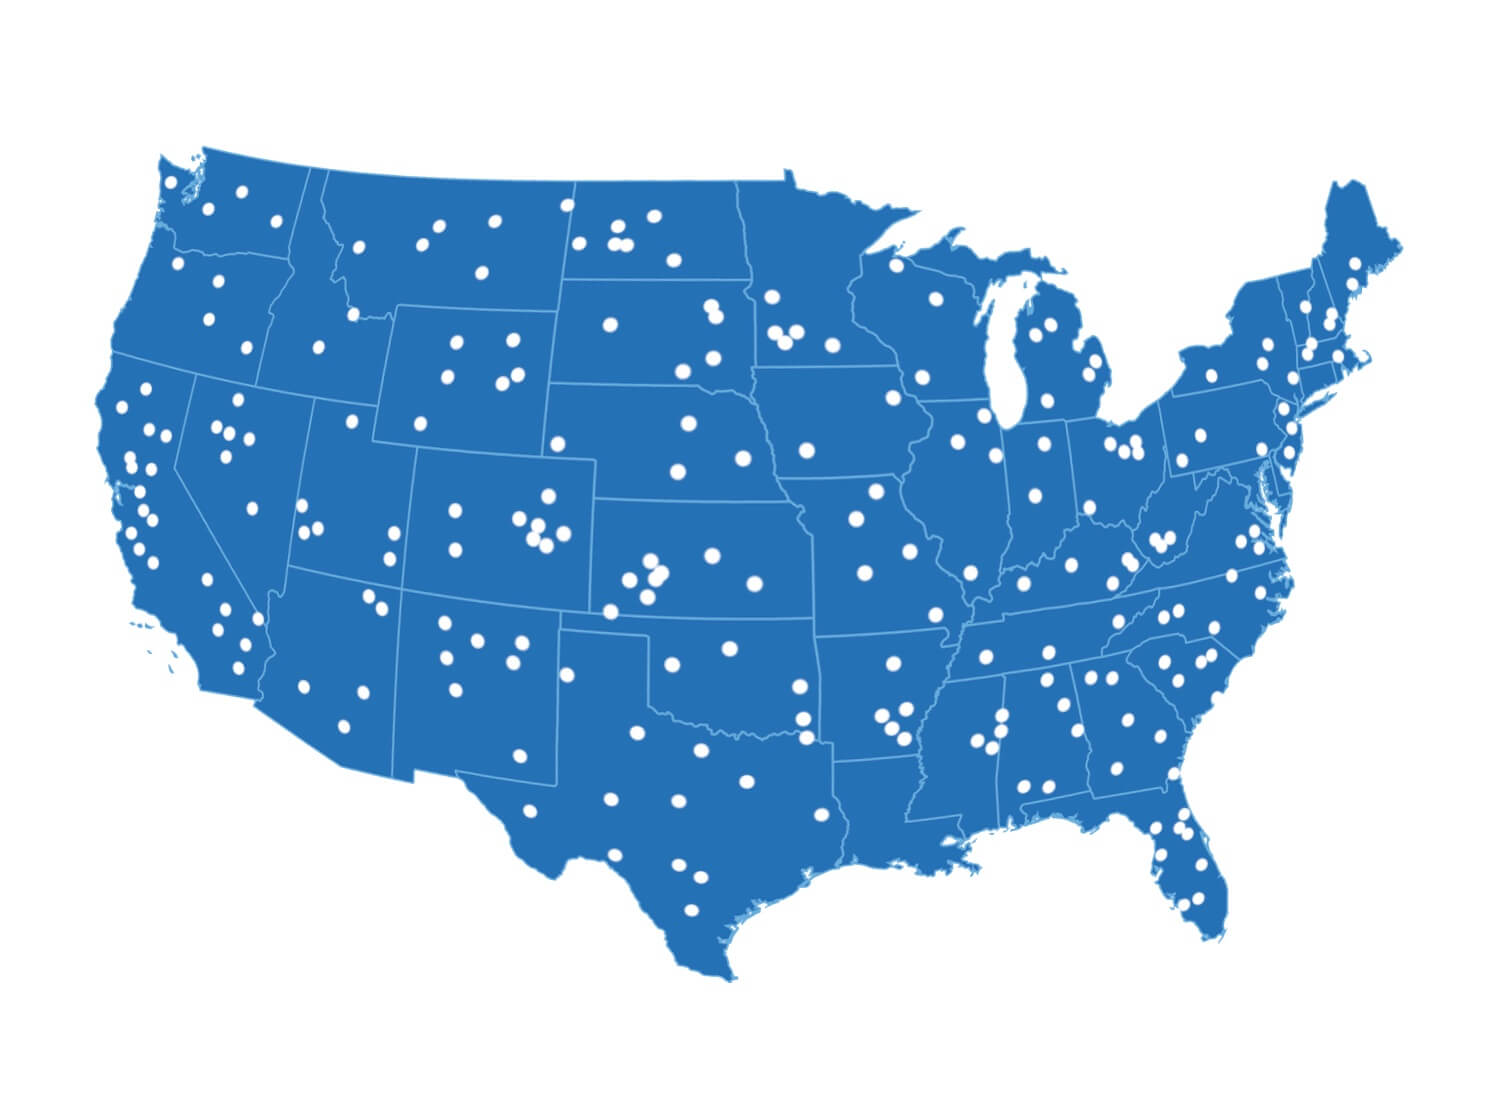 Map of USA showing Driverge service locations